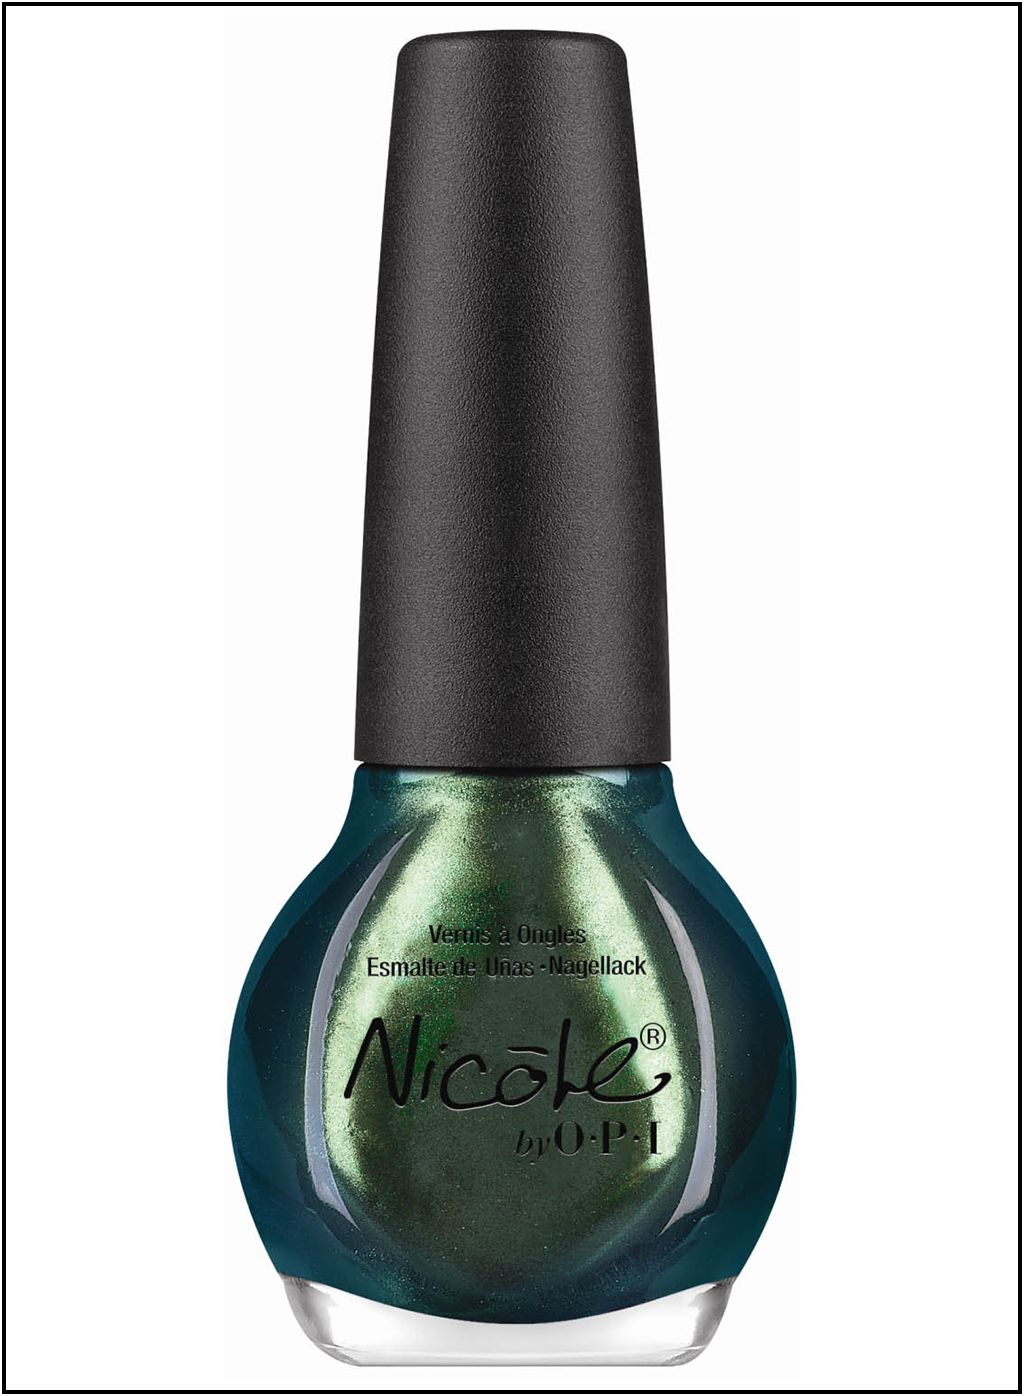 Nicole by OPI Candid Cameron Nail Polish Lacquer 05 oz Modern Family 